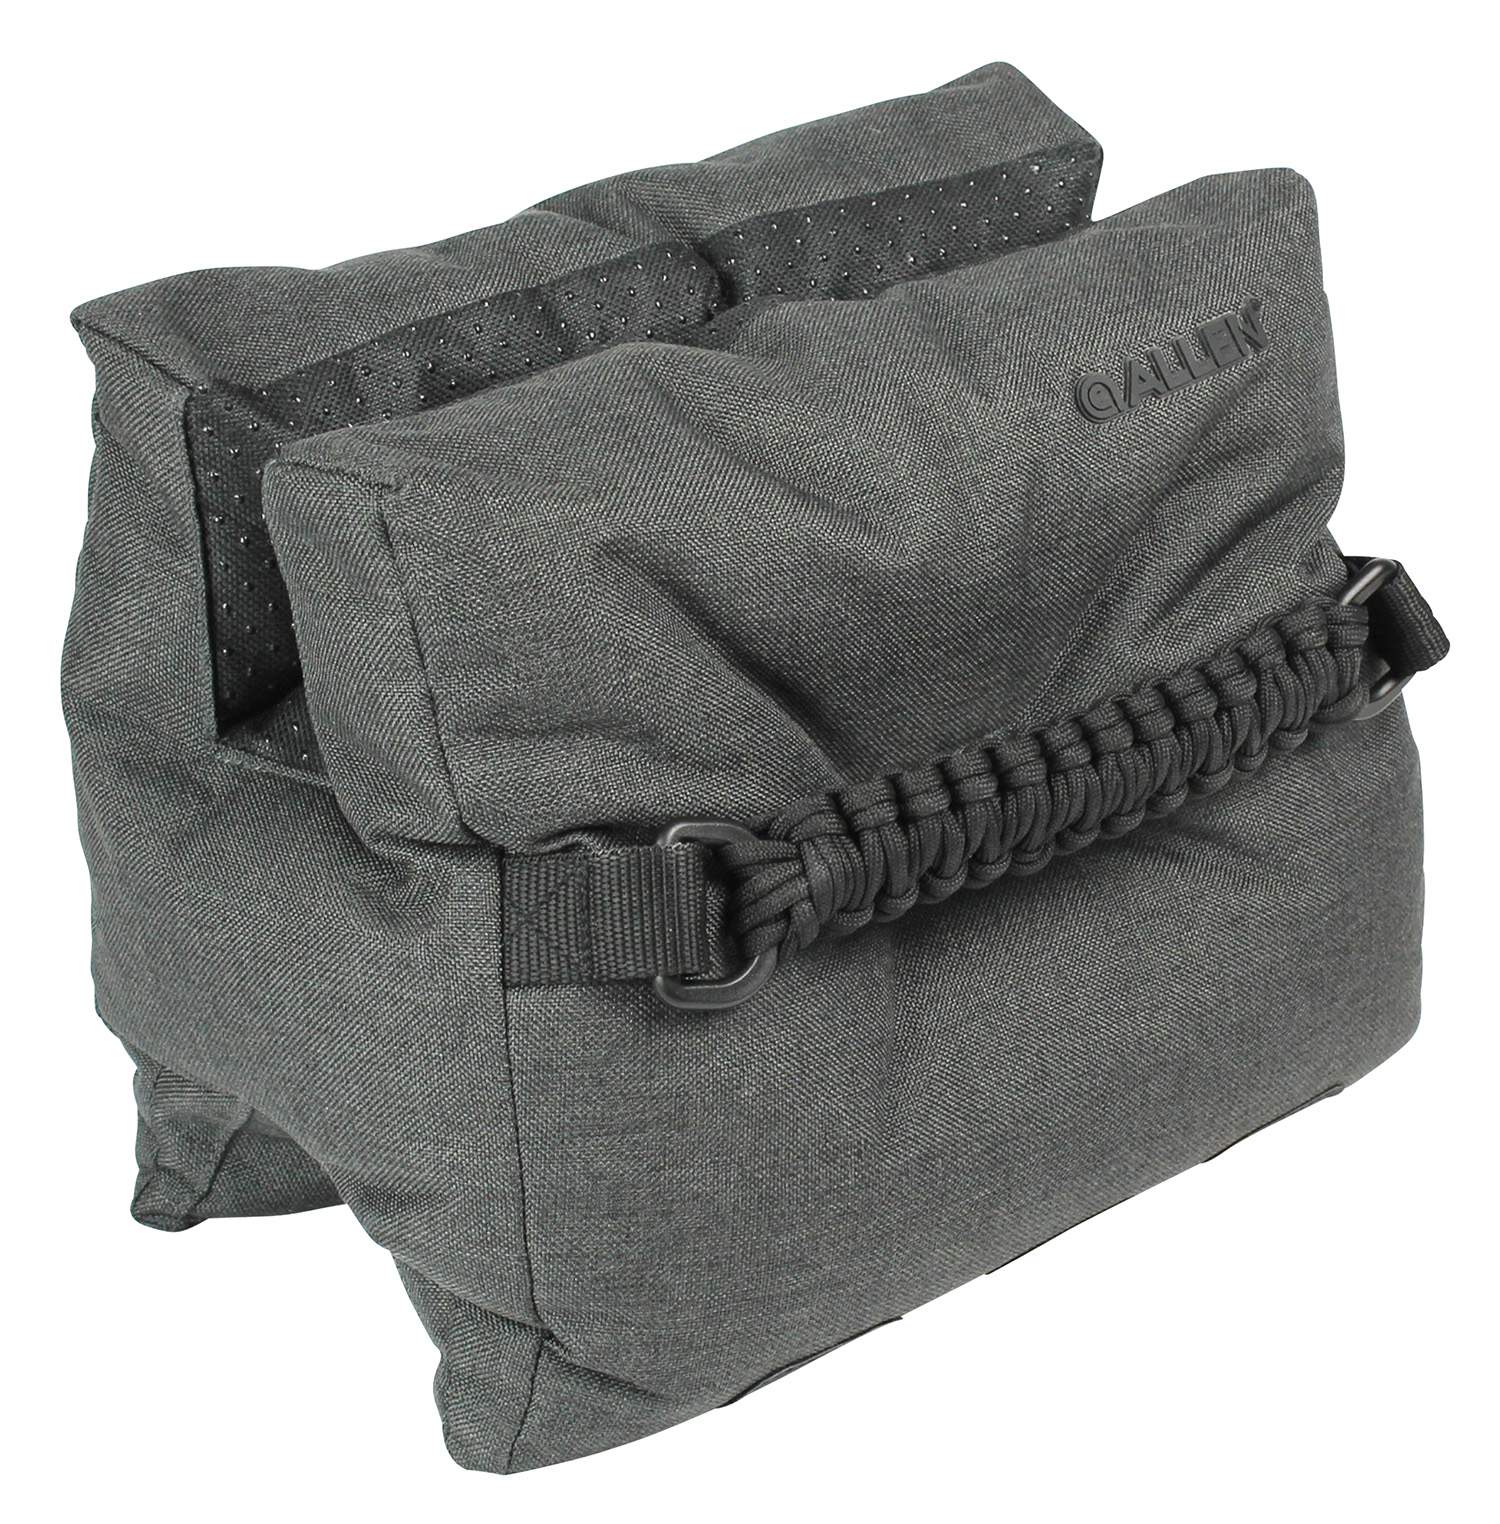 Allen 18416 Eliminator Shooting Rest Prefilled Front Bag made of Gray Polyester, weighs 12.10 lbs, 11.50